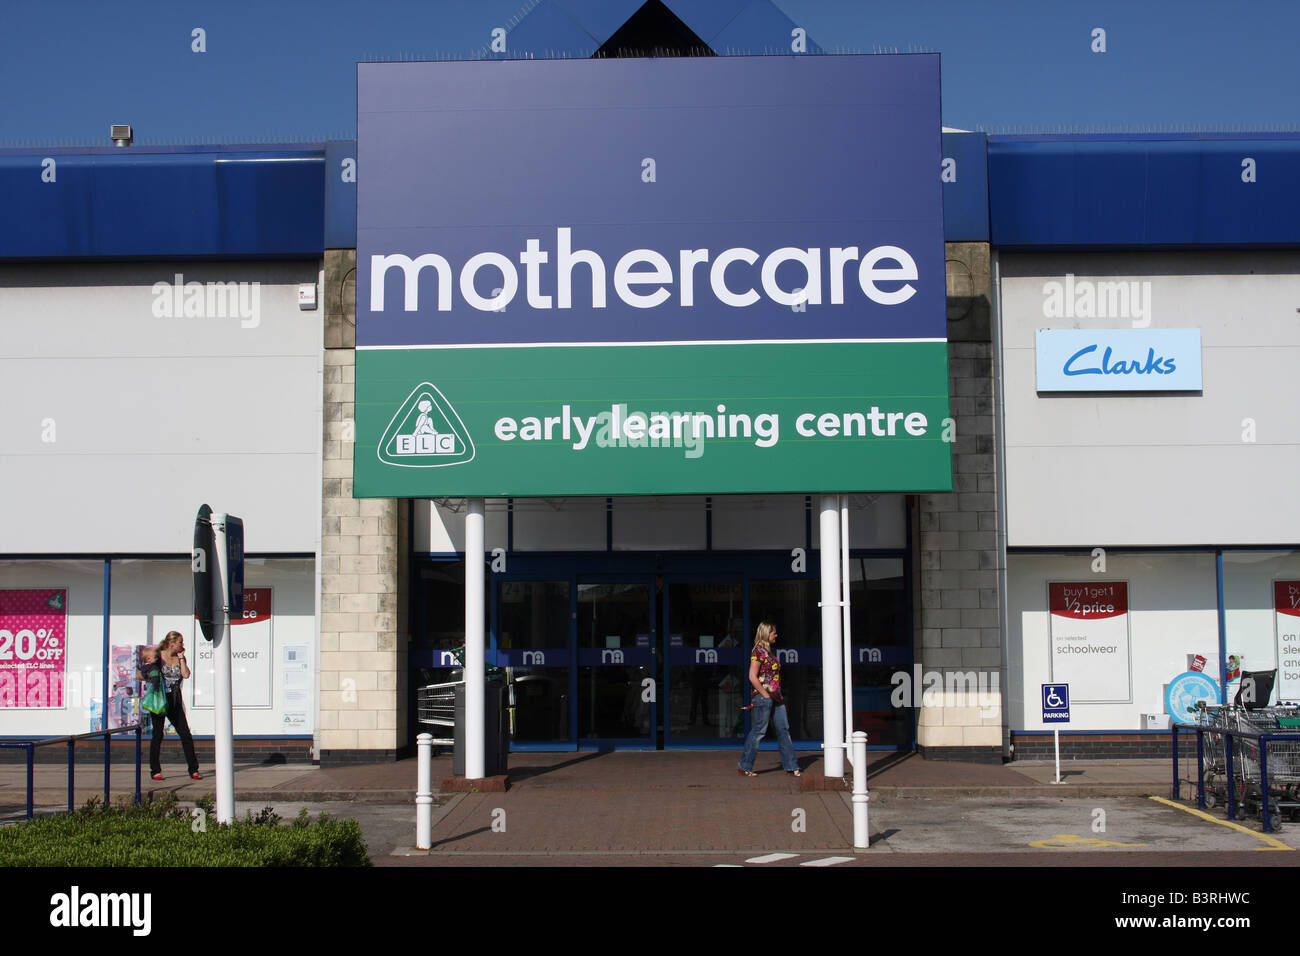 clarks at mothercare